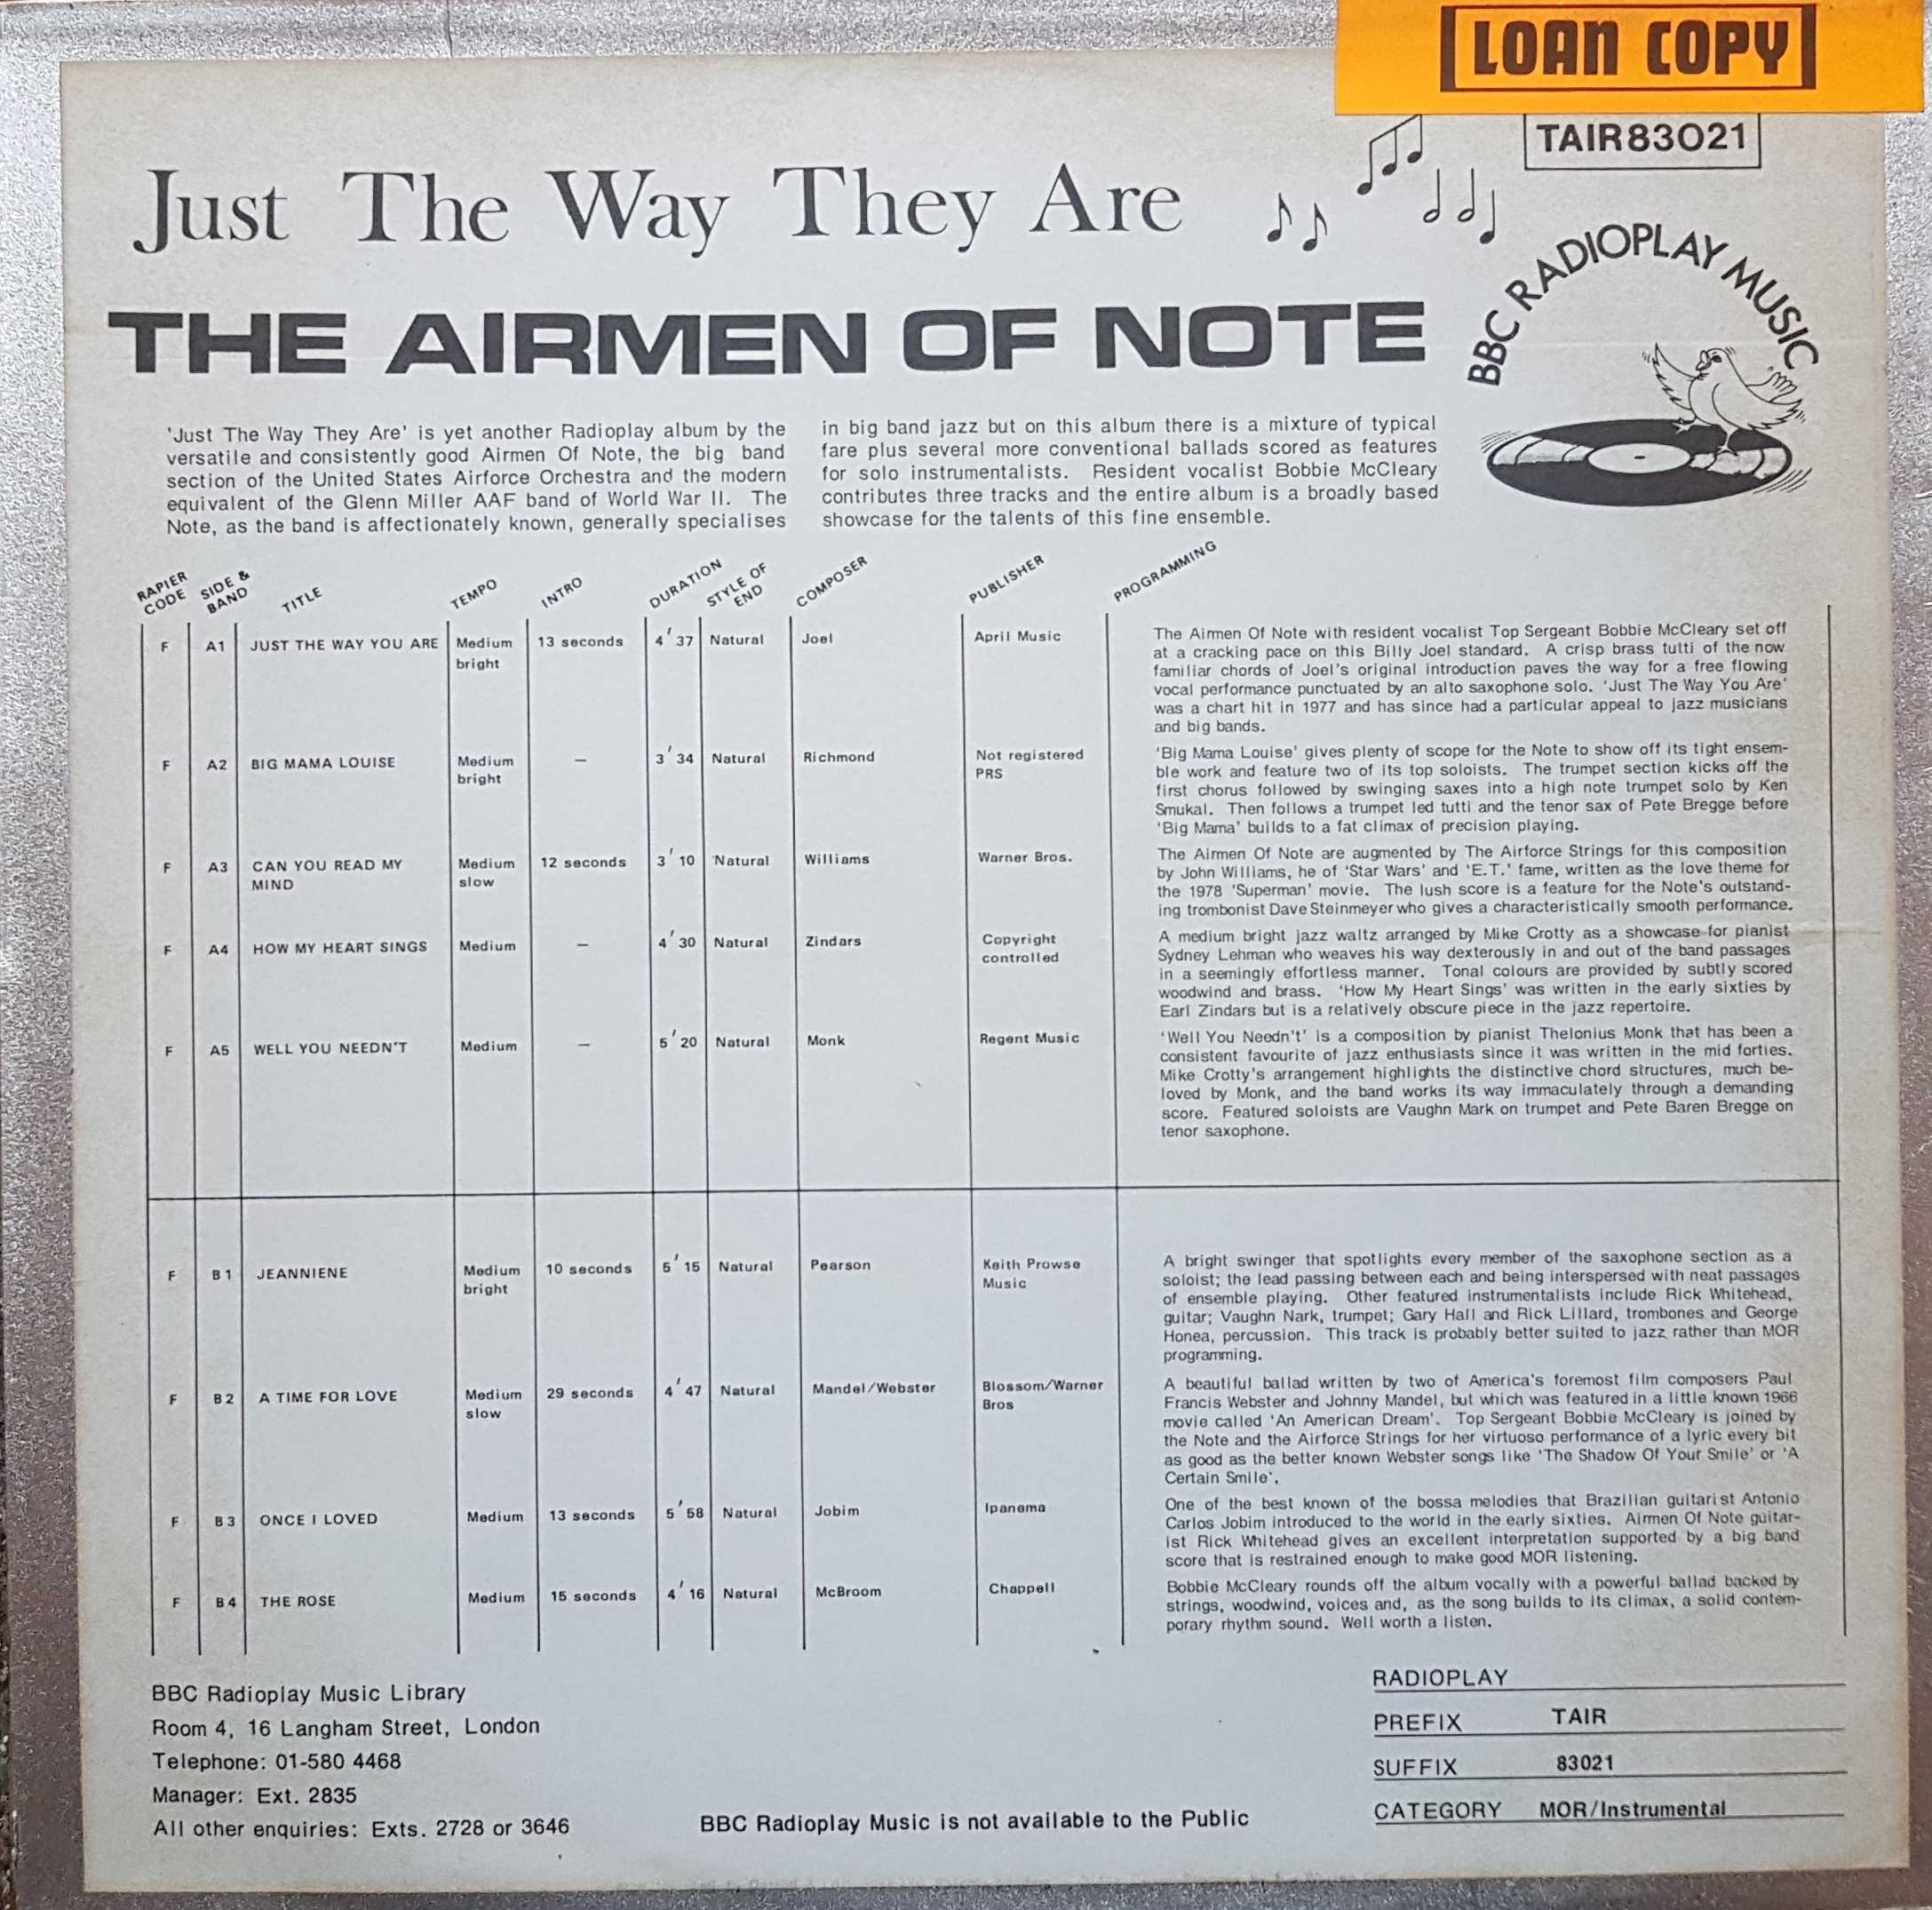 Picture of TAIR 83021 Just the way they are by artist The Airmen of Note from the BBC records and Tapes library